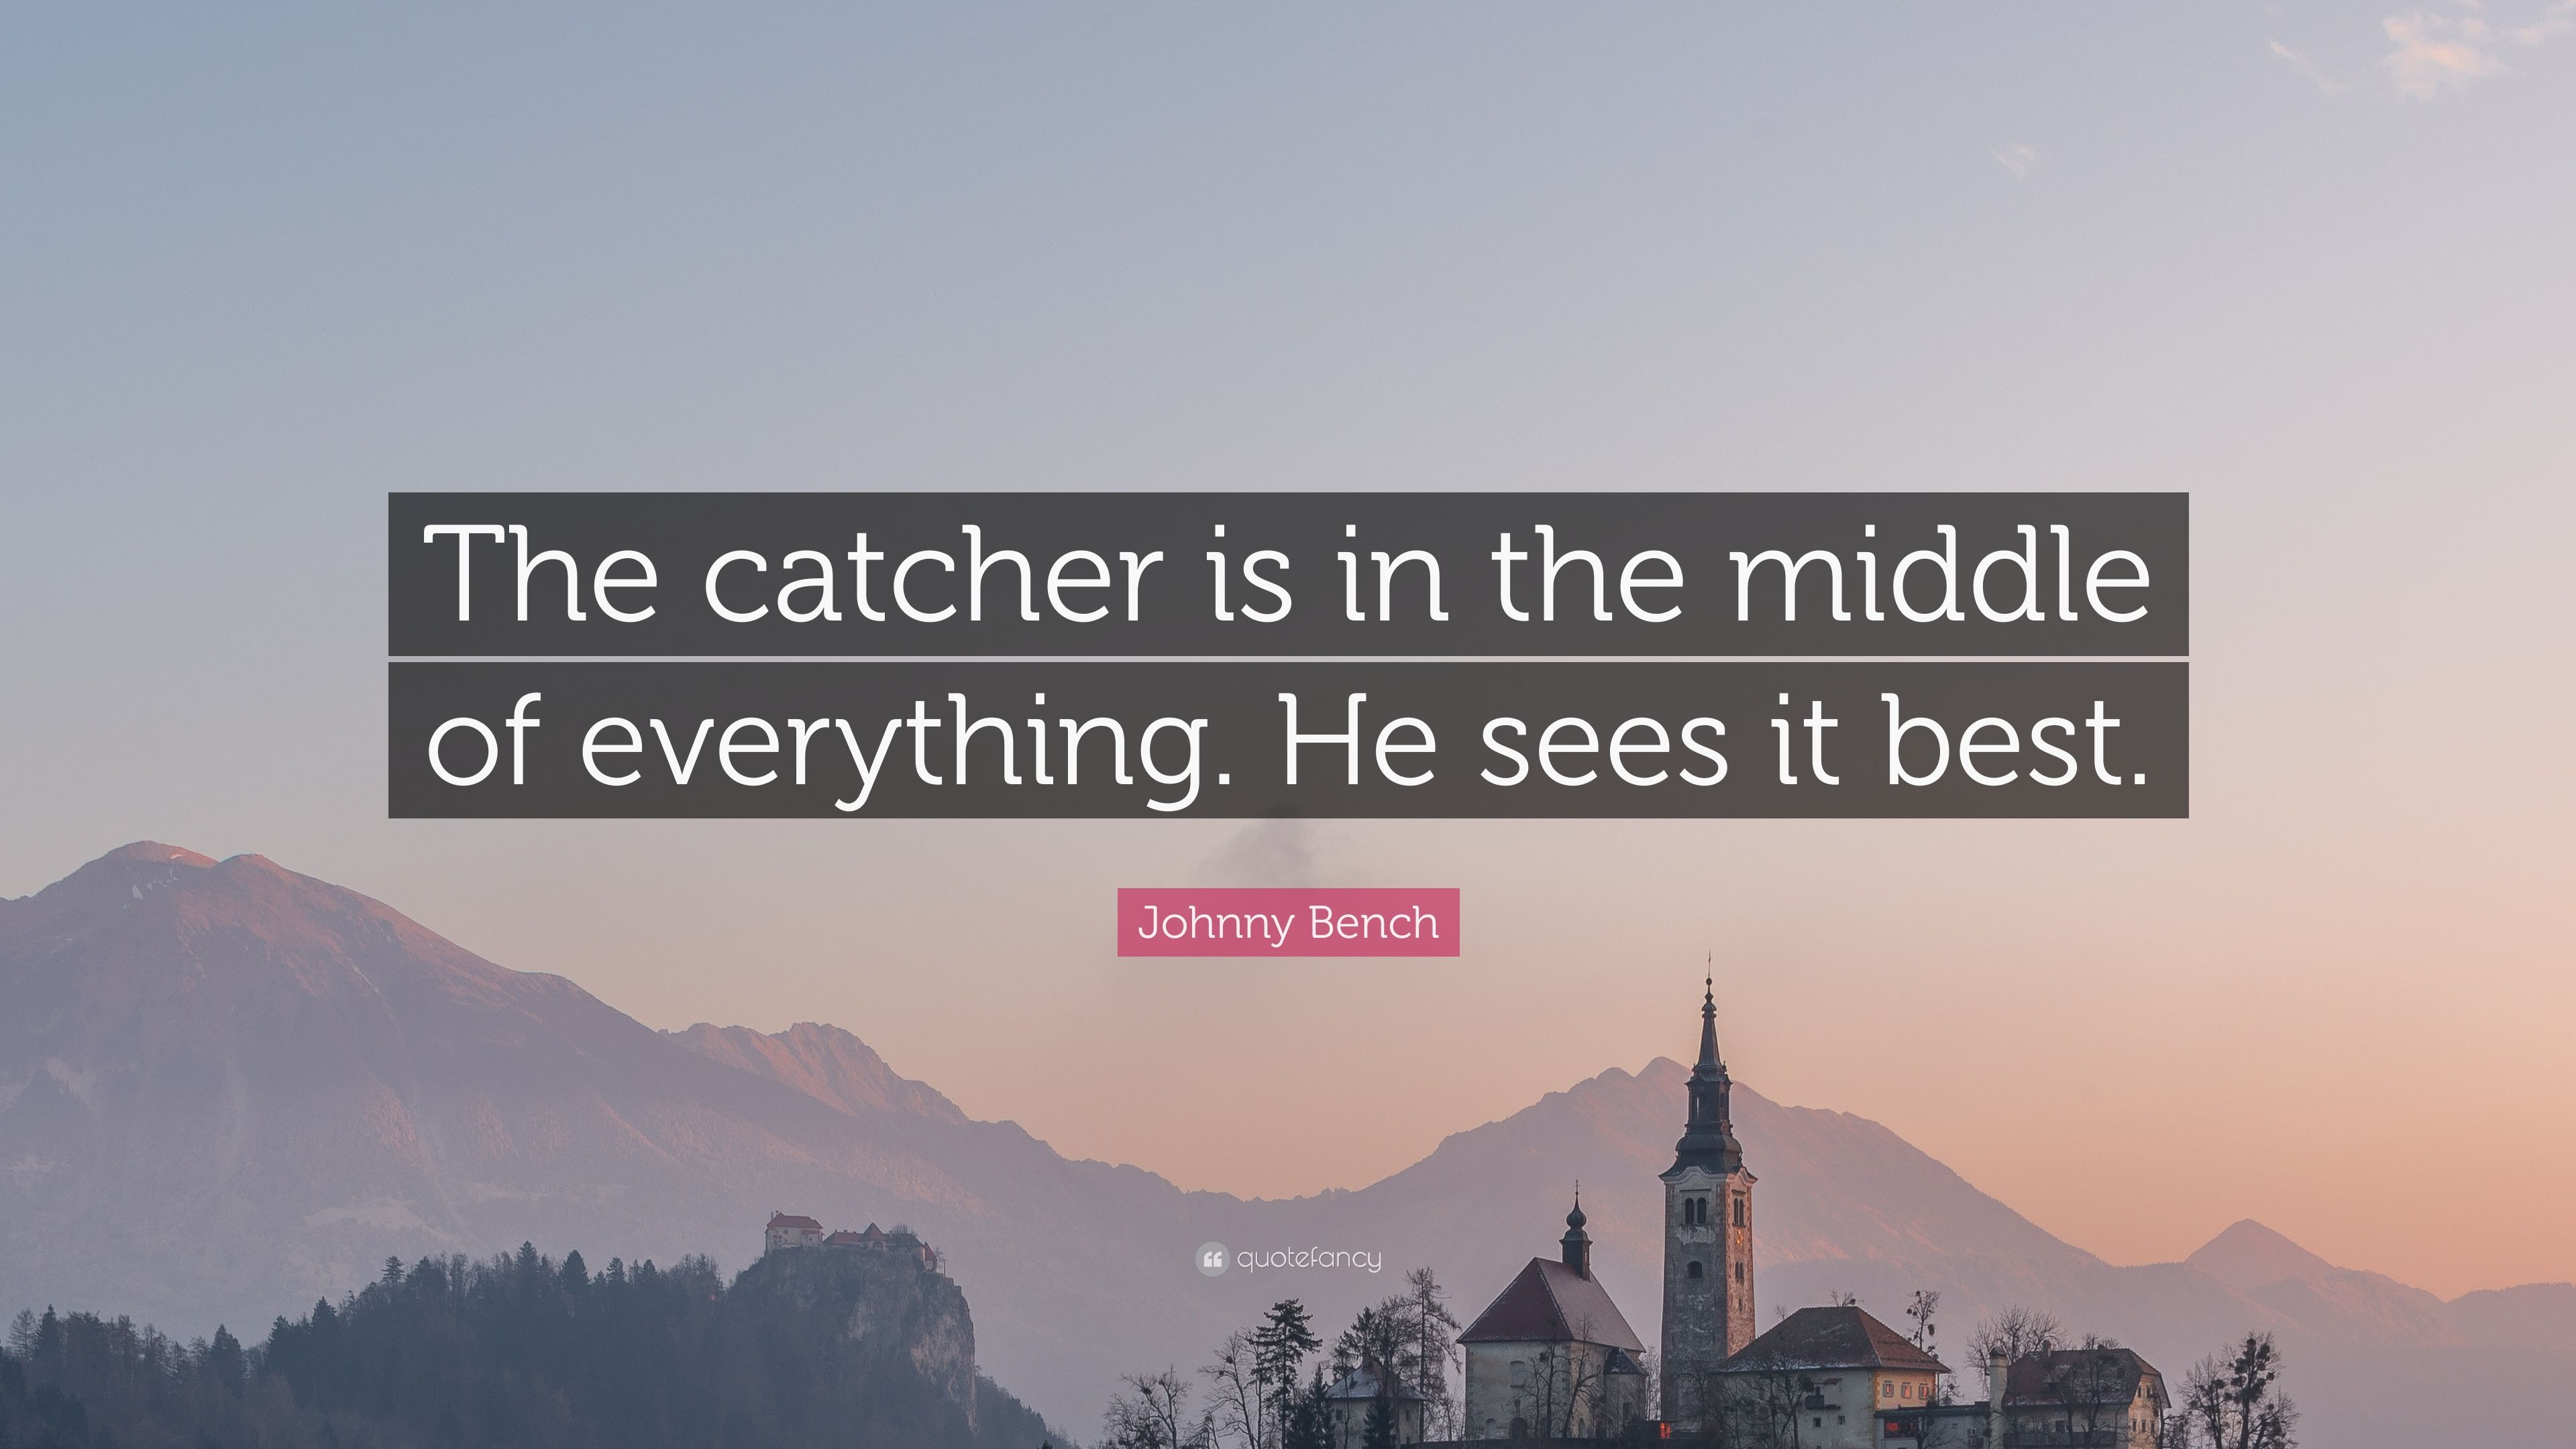 Johnny Bench Quote: “The catcher is in the middle of everything